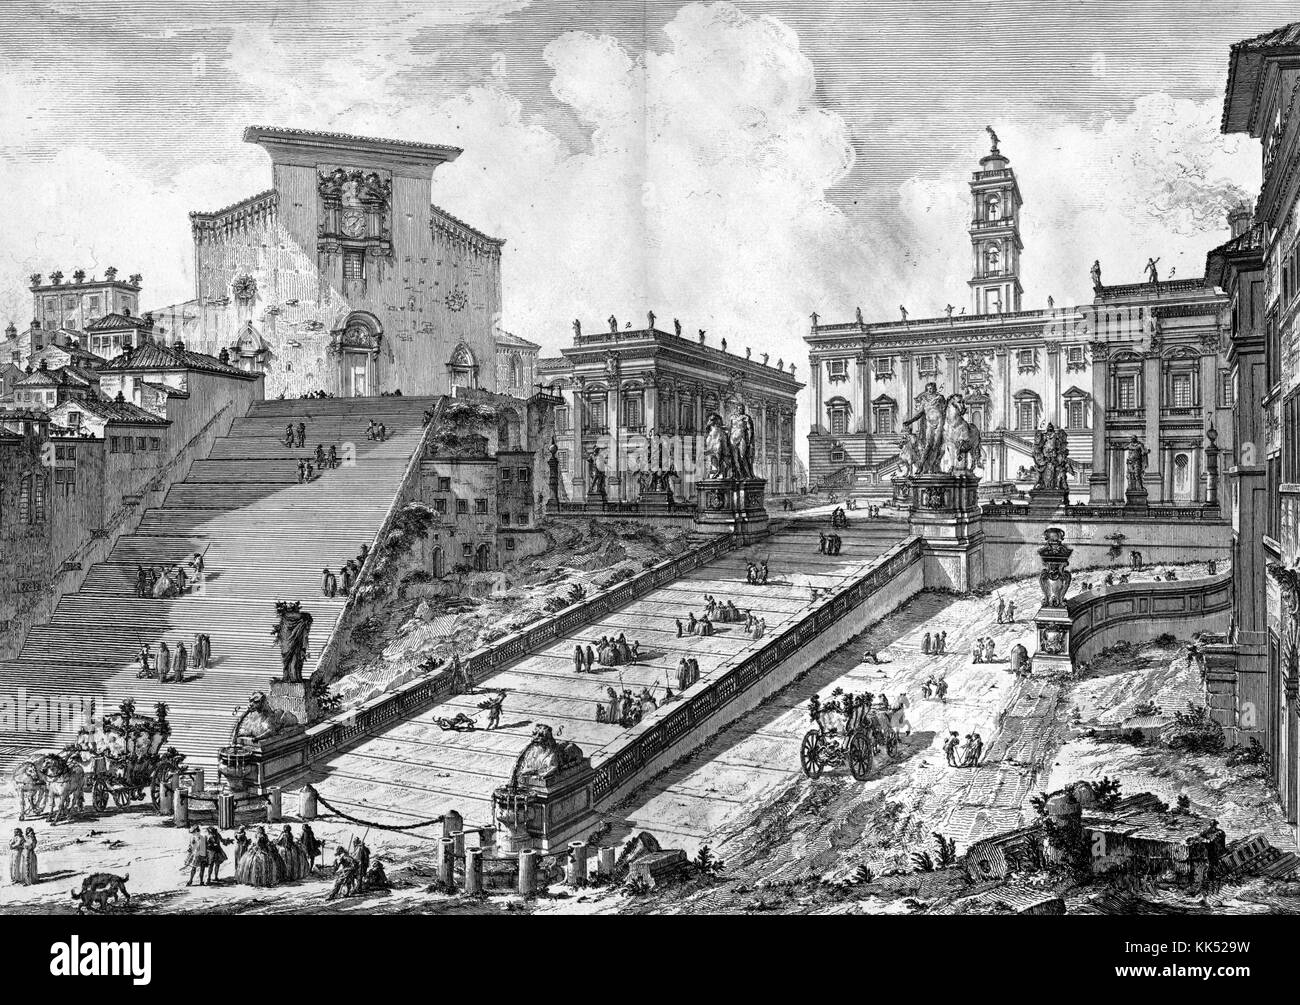 An etching depicting Capitoline Hill which stands in the background with a tower on top, a long staircase hleads up to the plaza in front it, the Church of Araceli can be seen on the left hand side of the image, it also has a long staircase, the area is very busy with people traveling to and from these buildings along with others in the immediate area, Rome, Italy, 1749. From the New York Public Library. Stock Photo